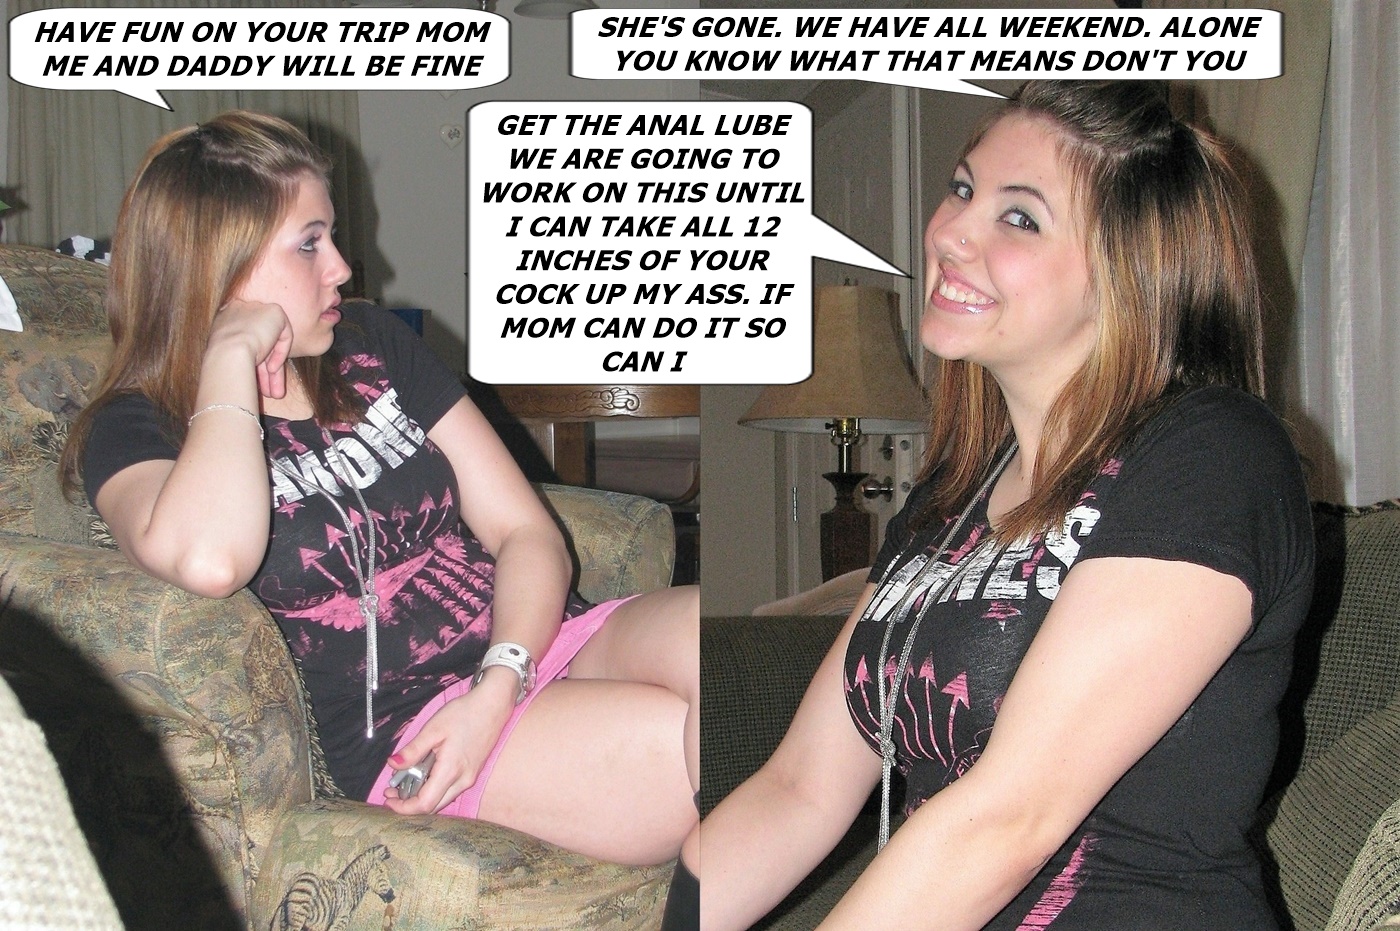 Funny Family Porn Captions - Family Fun Captions - 80828086_065_25d8 Porn Pic - EPORNER